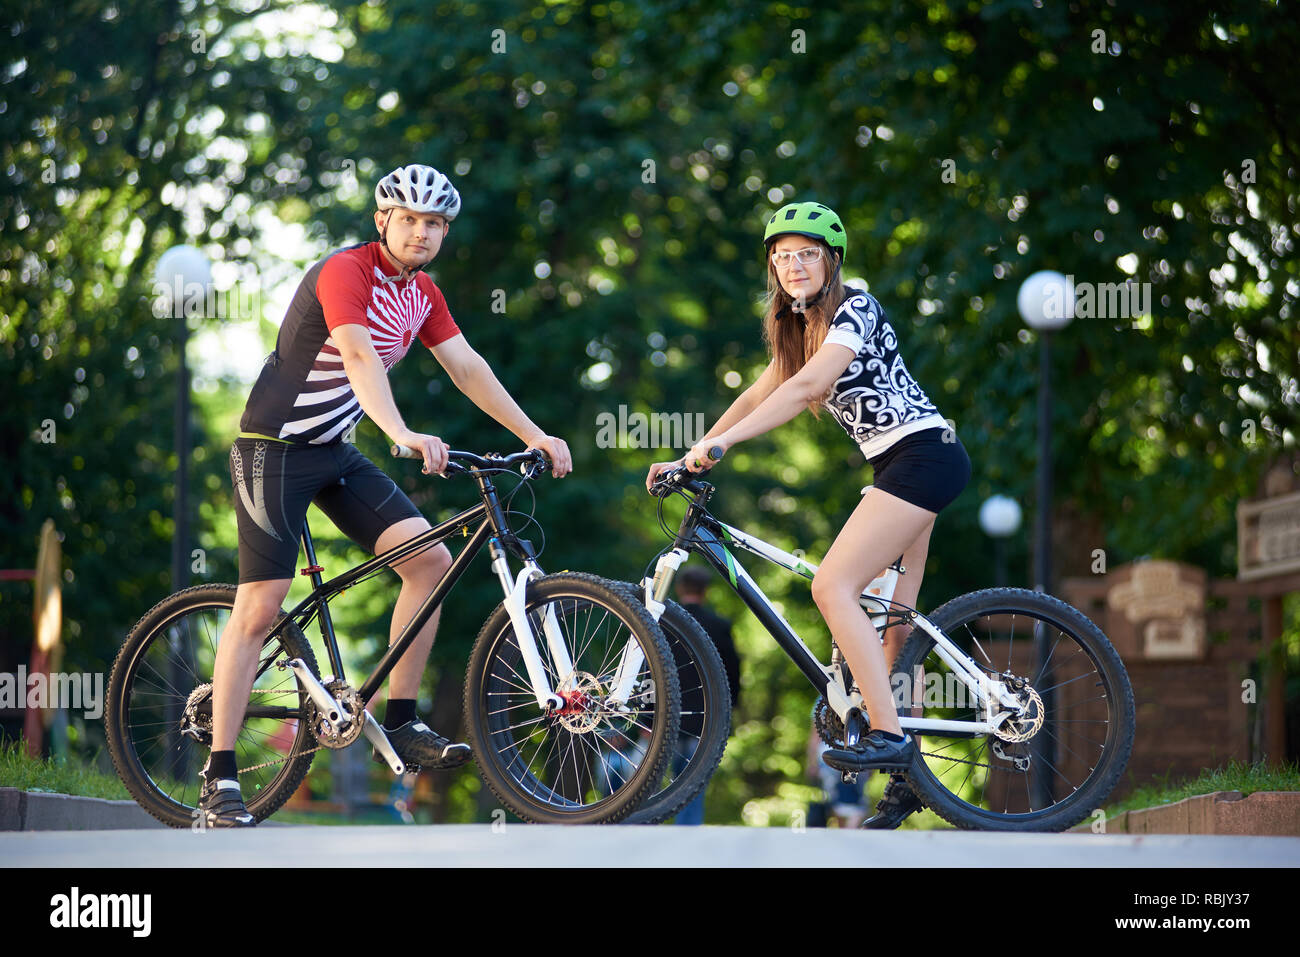 59,135 Hipster Bicycle Images, Stock Photos Vectors, 42% OFF